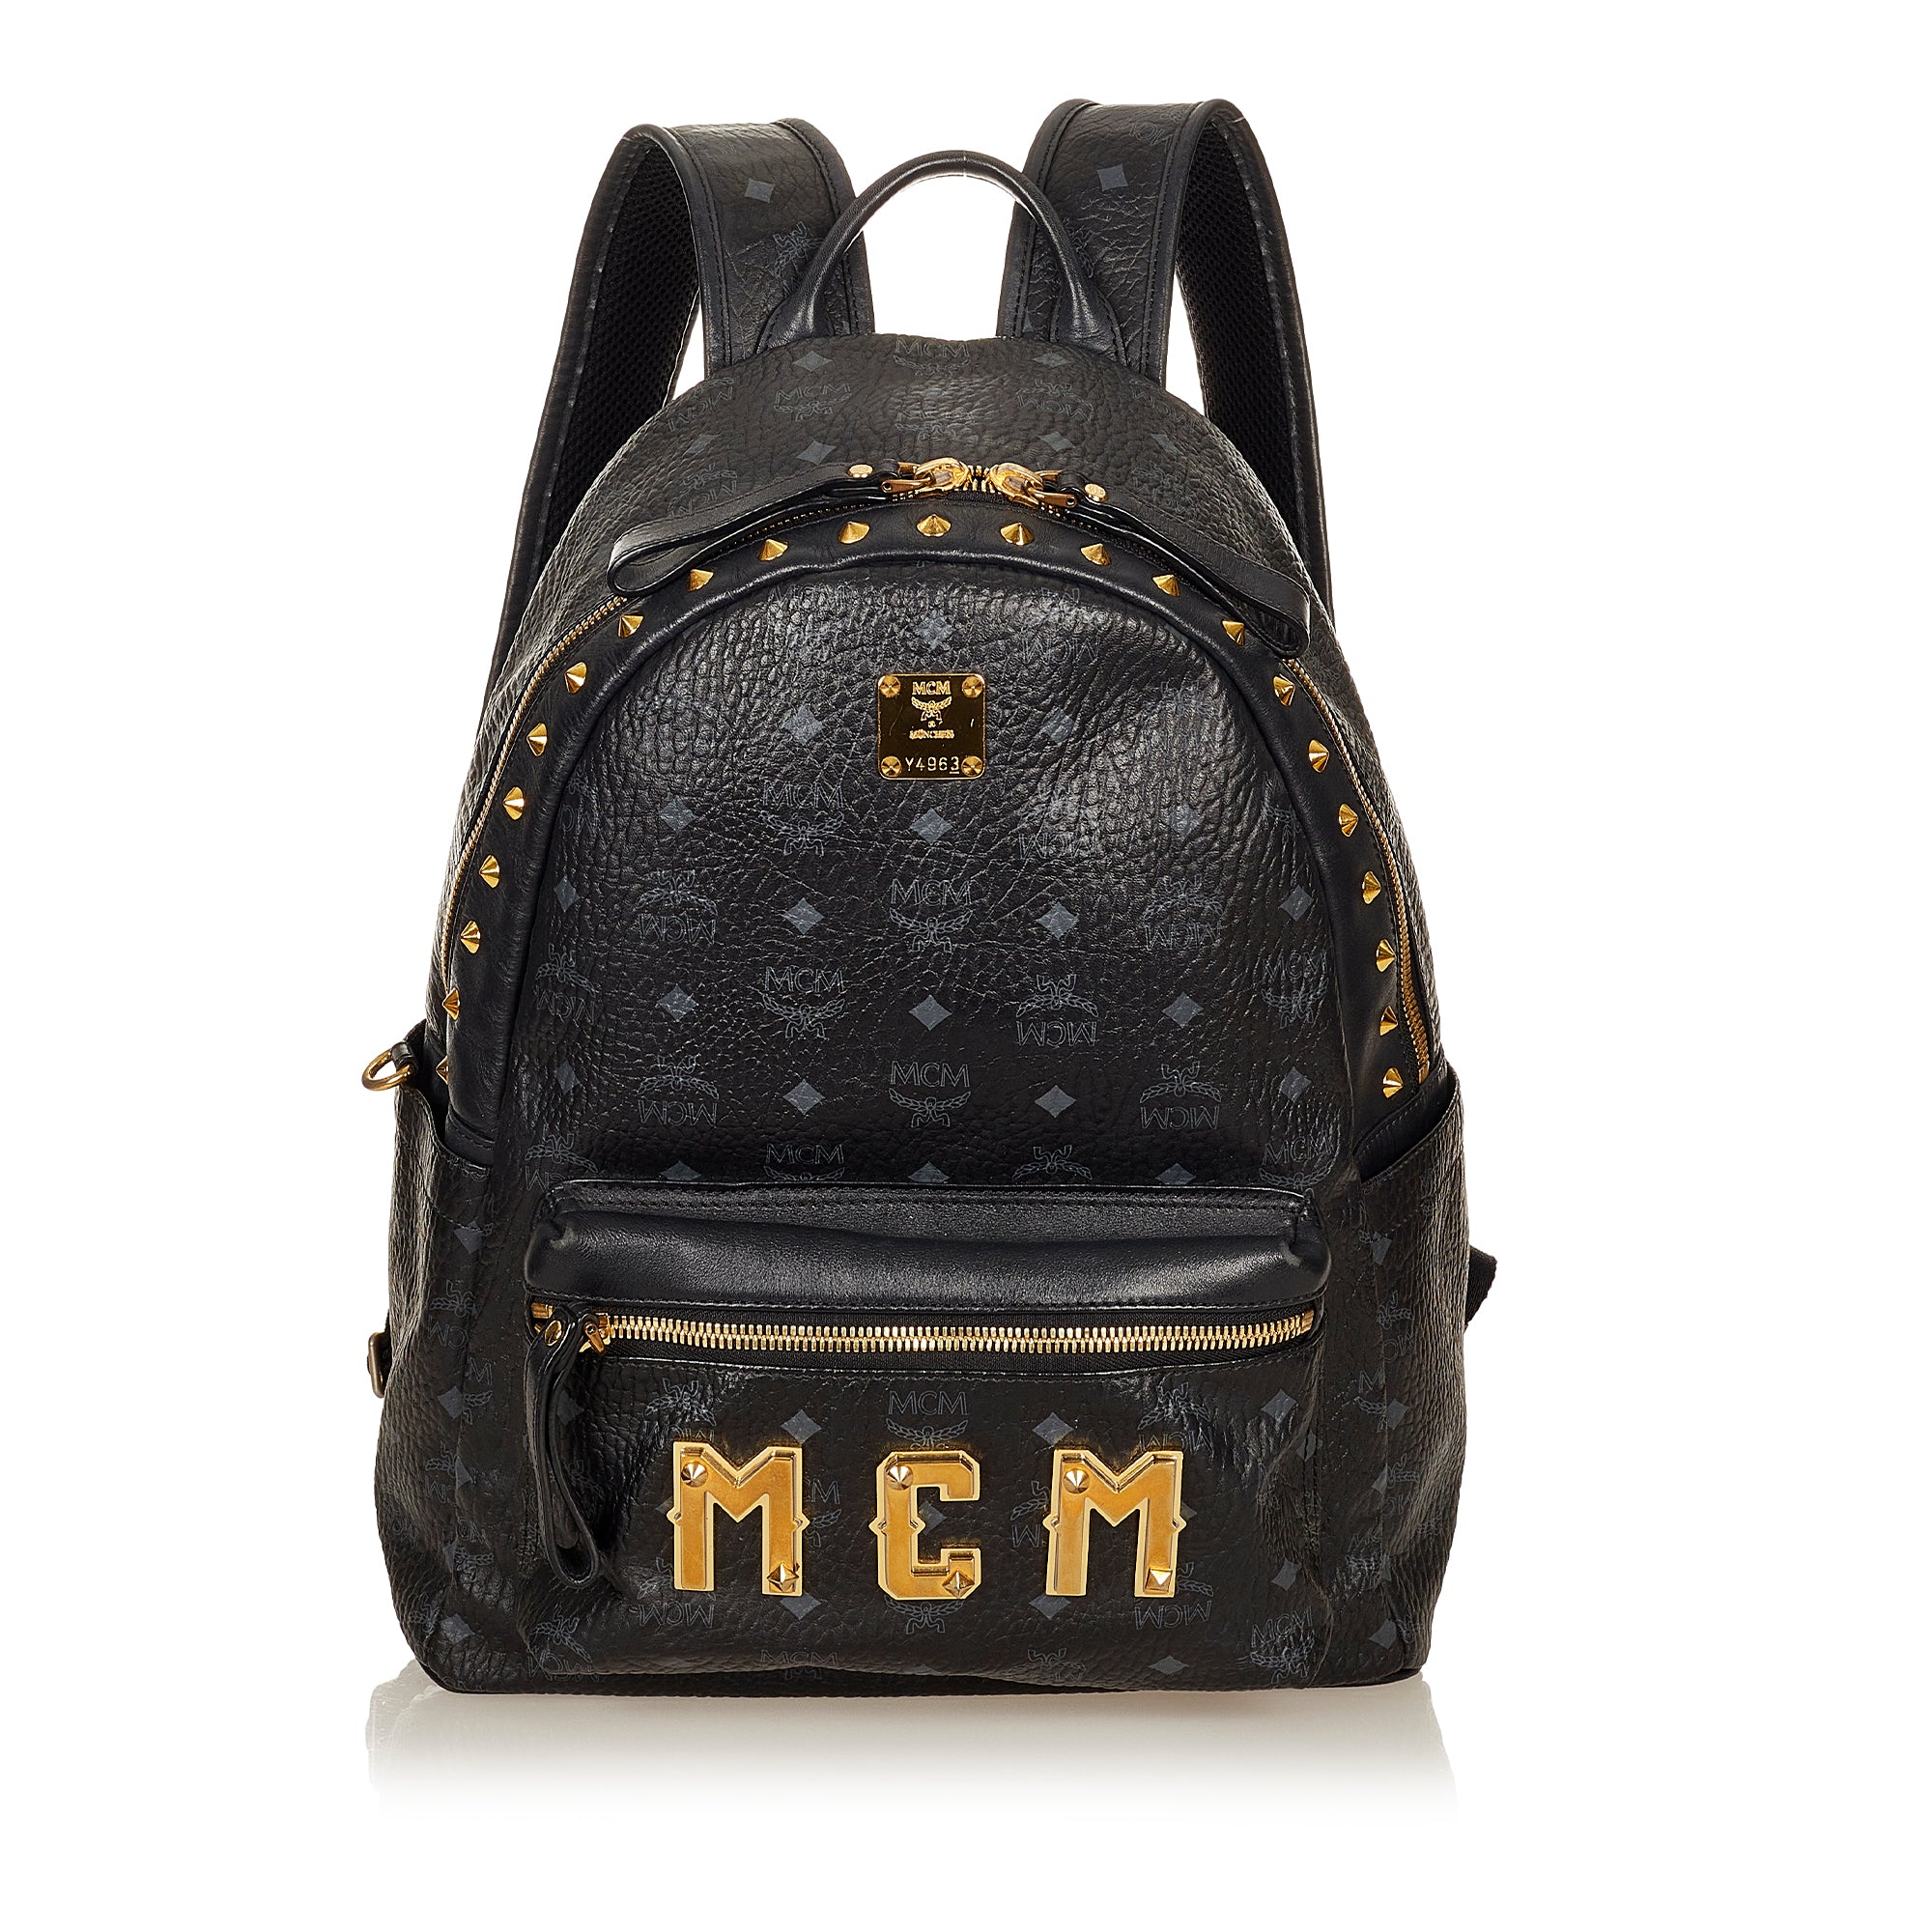 Authentic Bags Only - Designer Bags - MCM Leather Backpack Bag